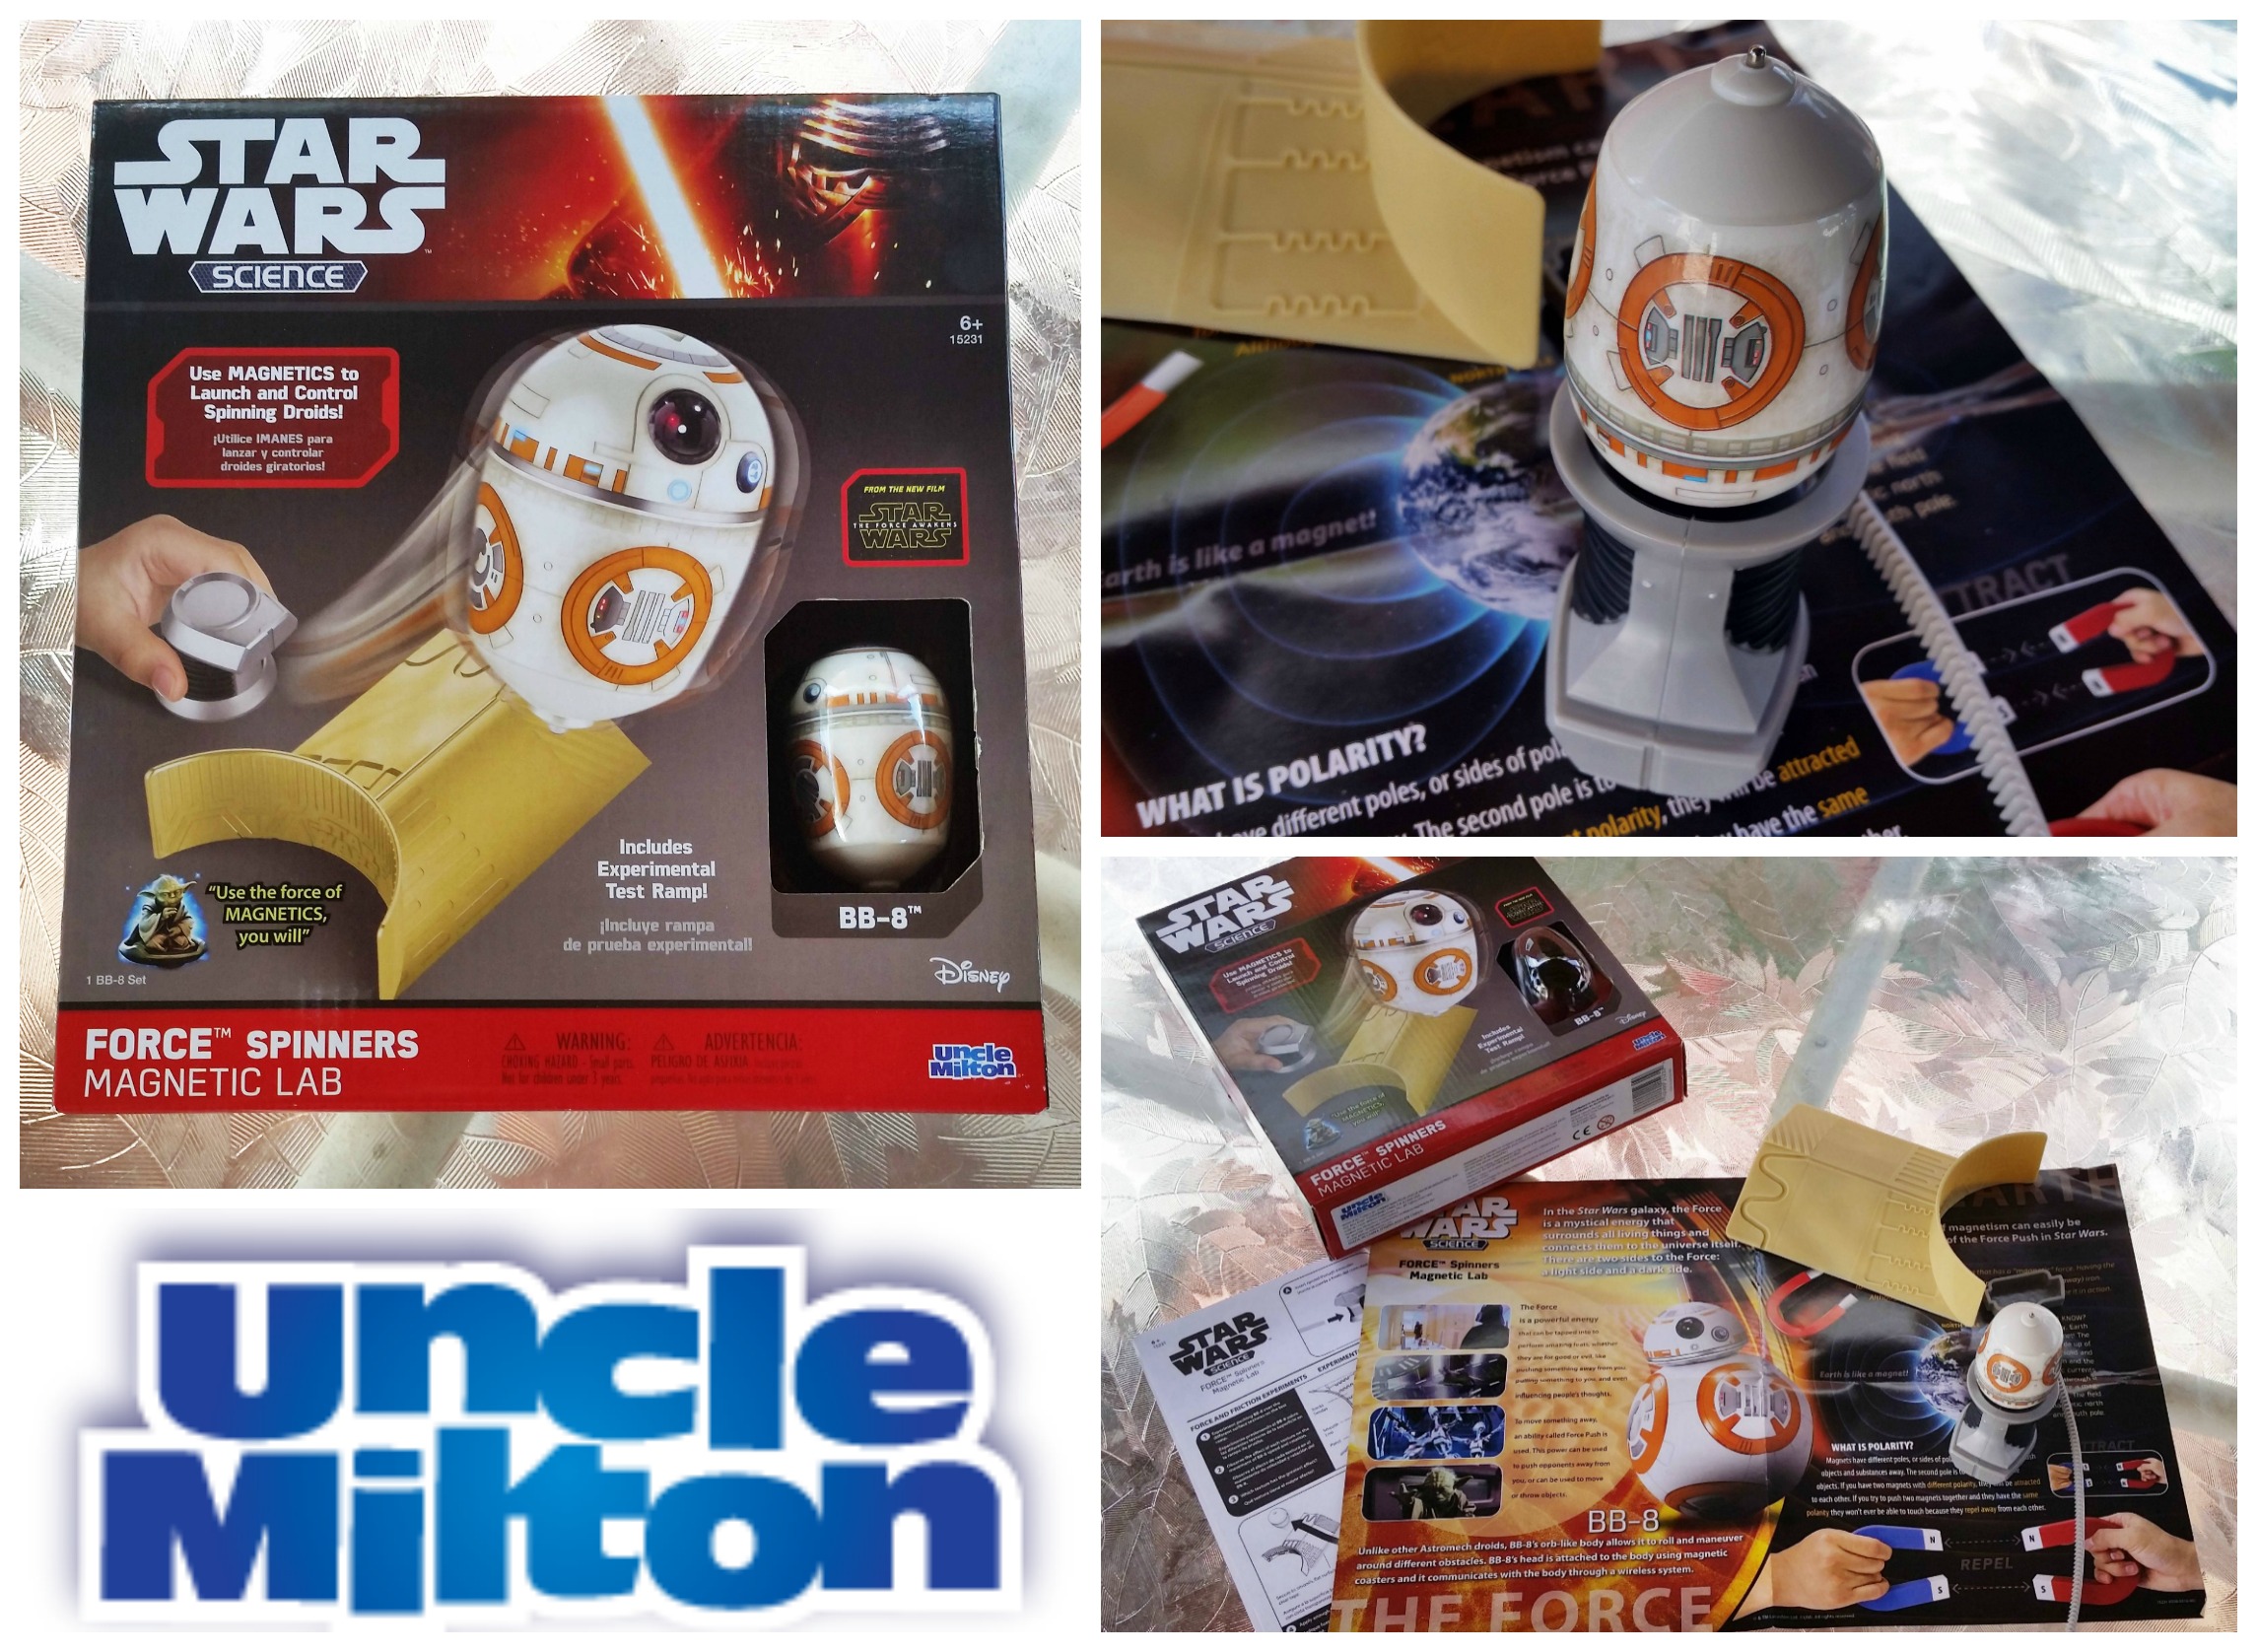 Star Wars BB-8 Force Spinners Magnetic Lab #Review 4